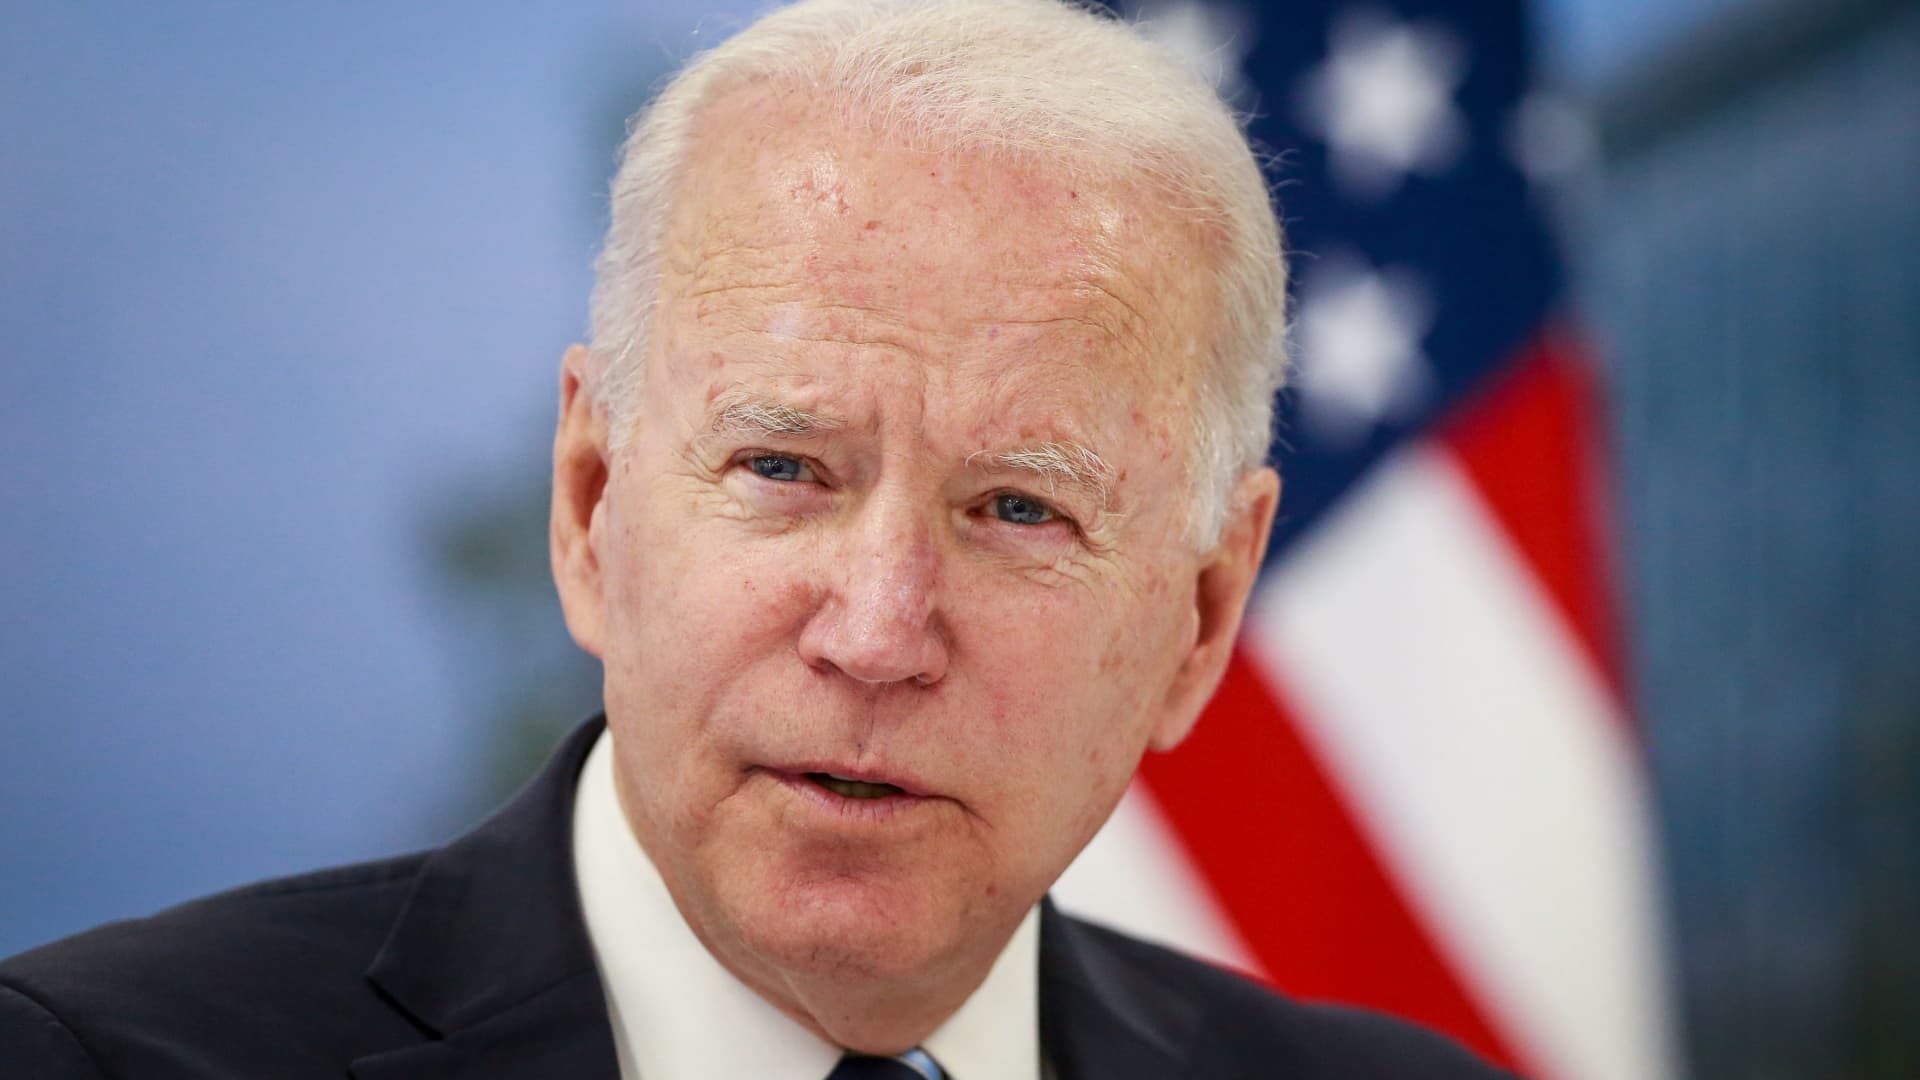 Biden brings more troops and sanctions to NATO amid rising fears of Russian chemical warfare